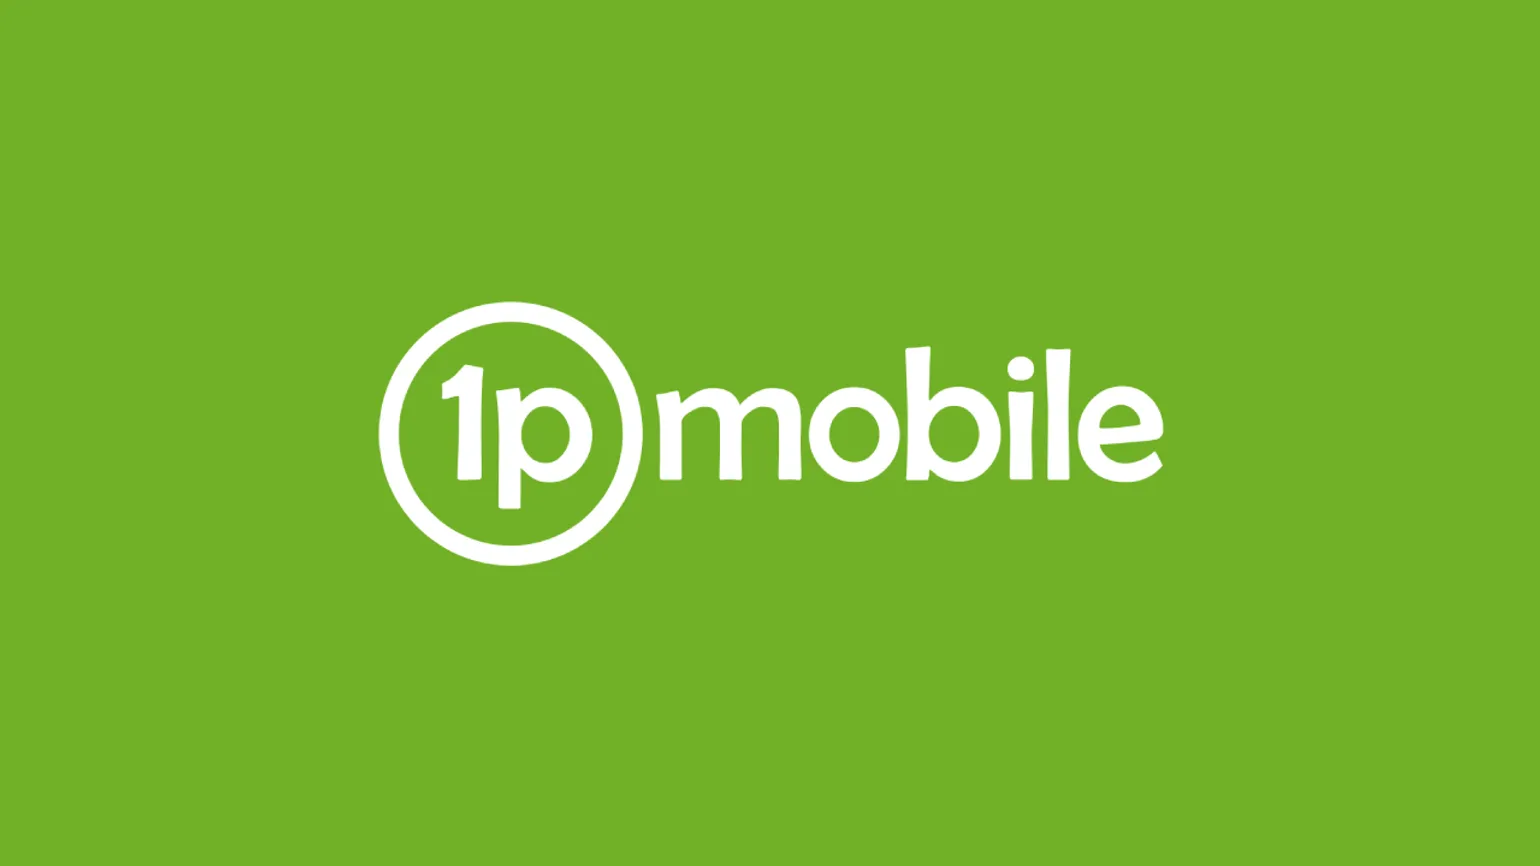 1pMobile review - cheap rates with excellent customer service